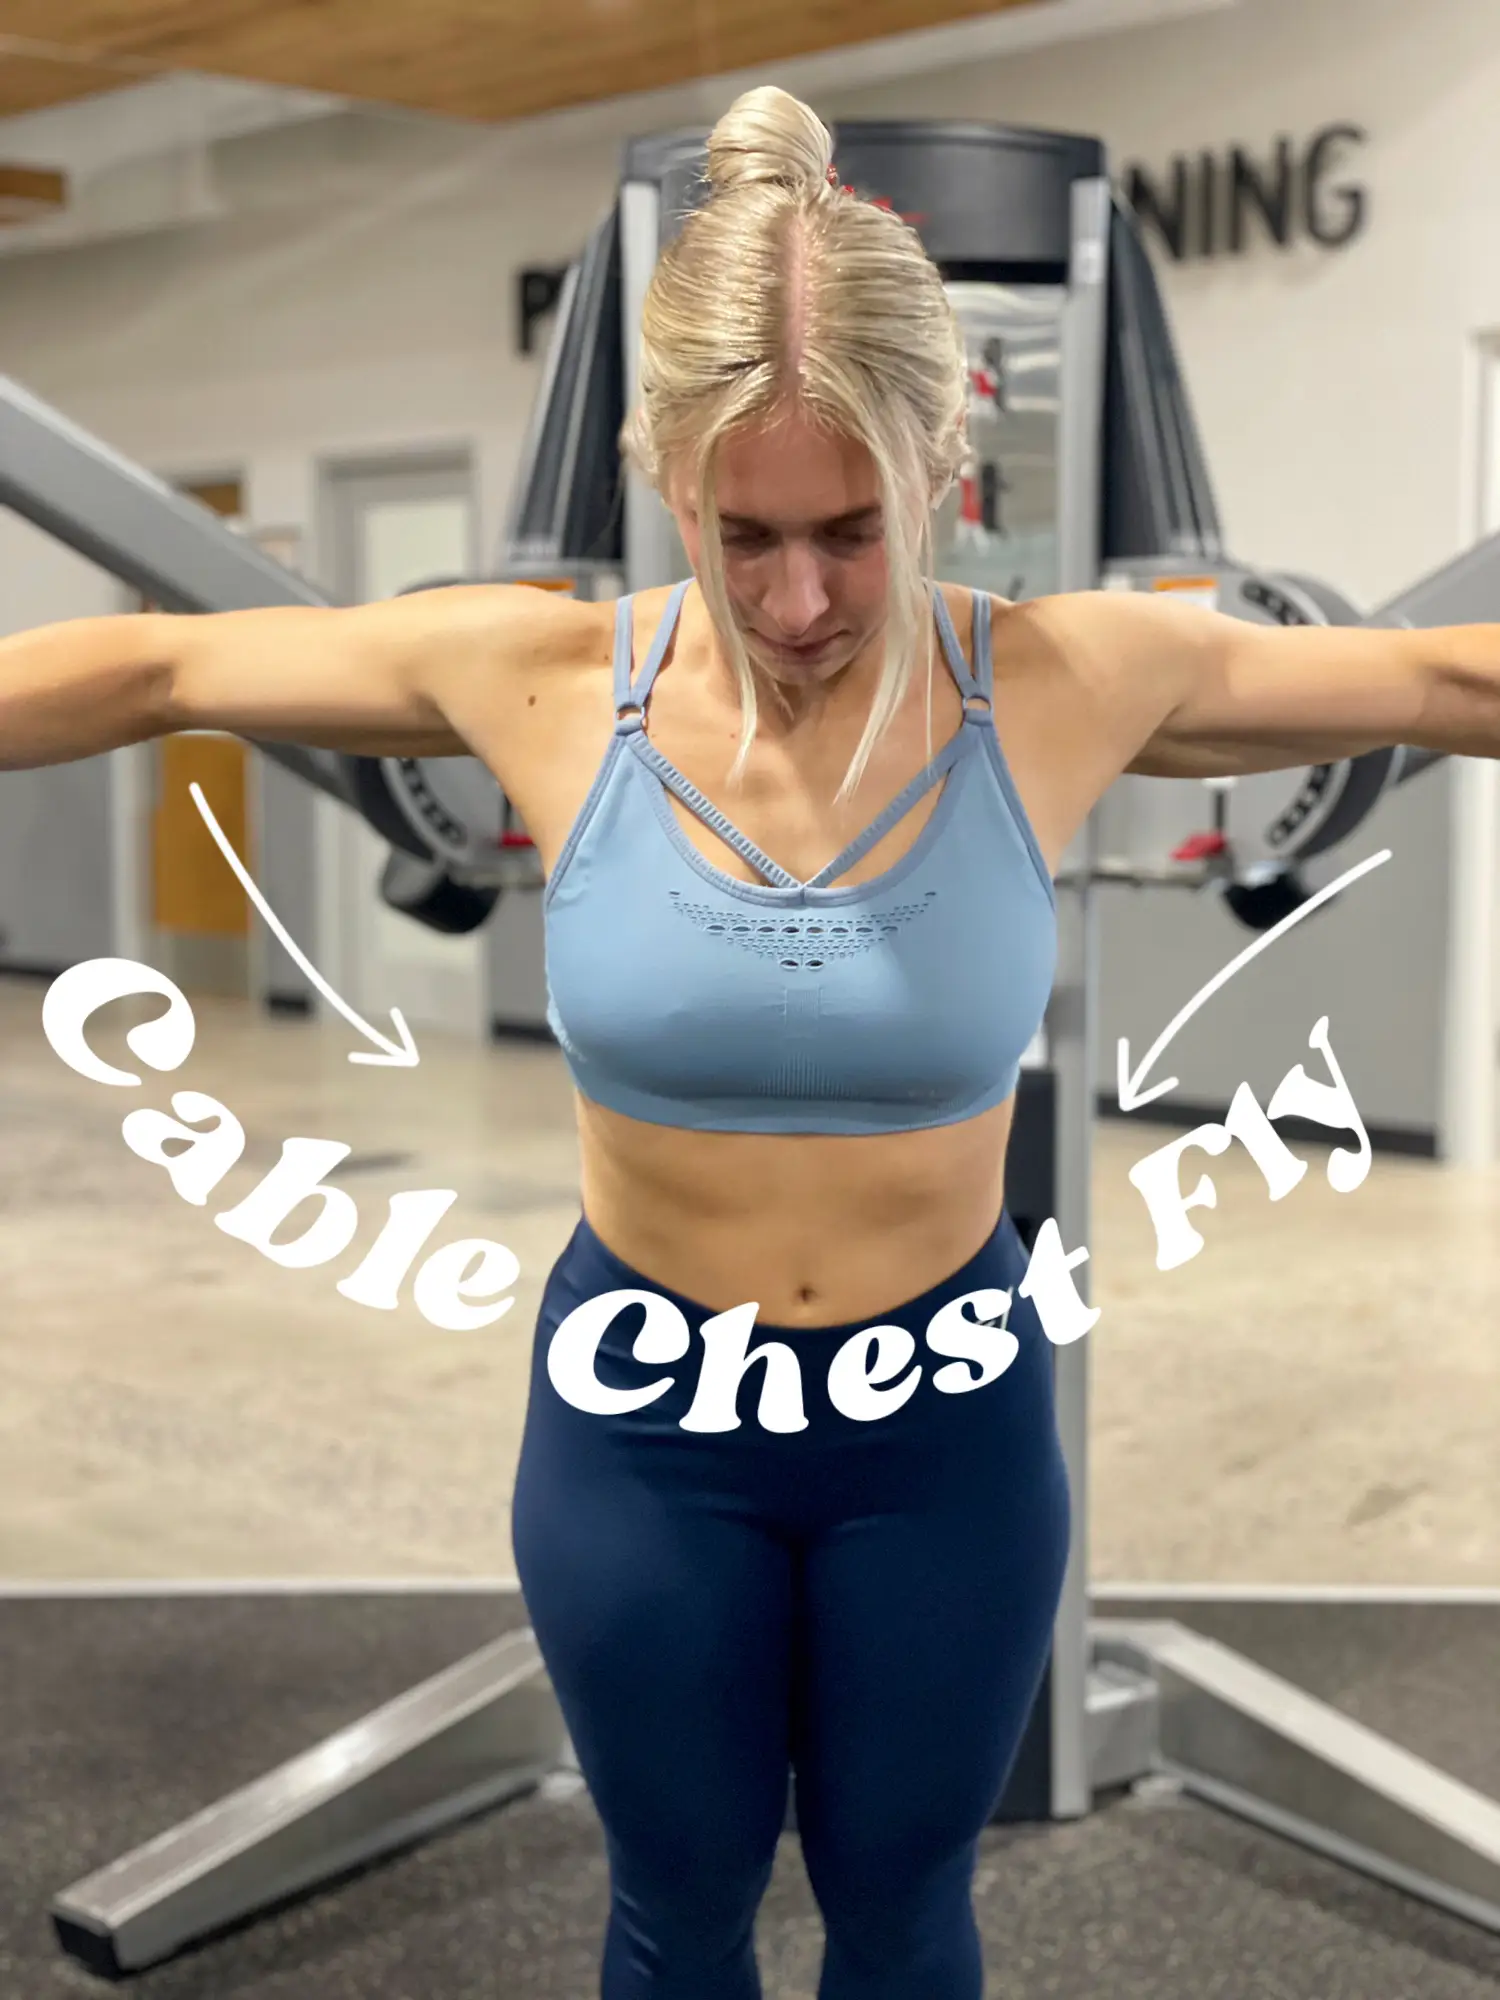 Toned Chest Workout For The Girls! 💁🏼‍♀️